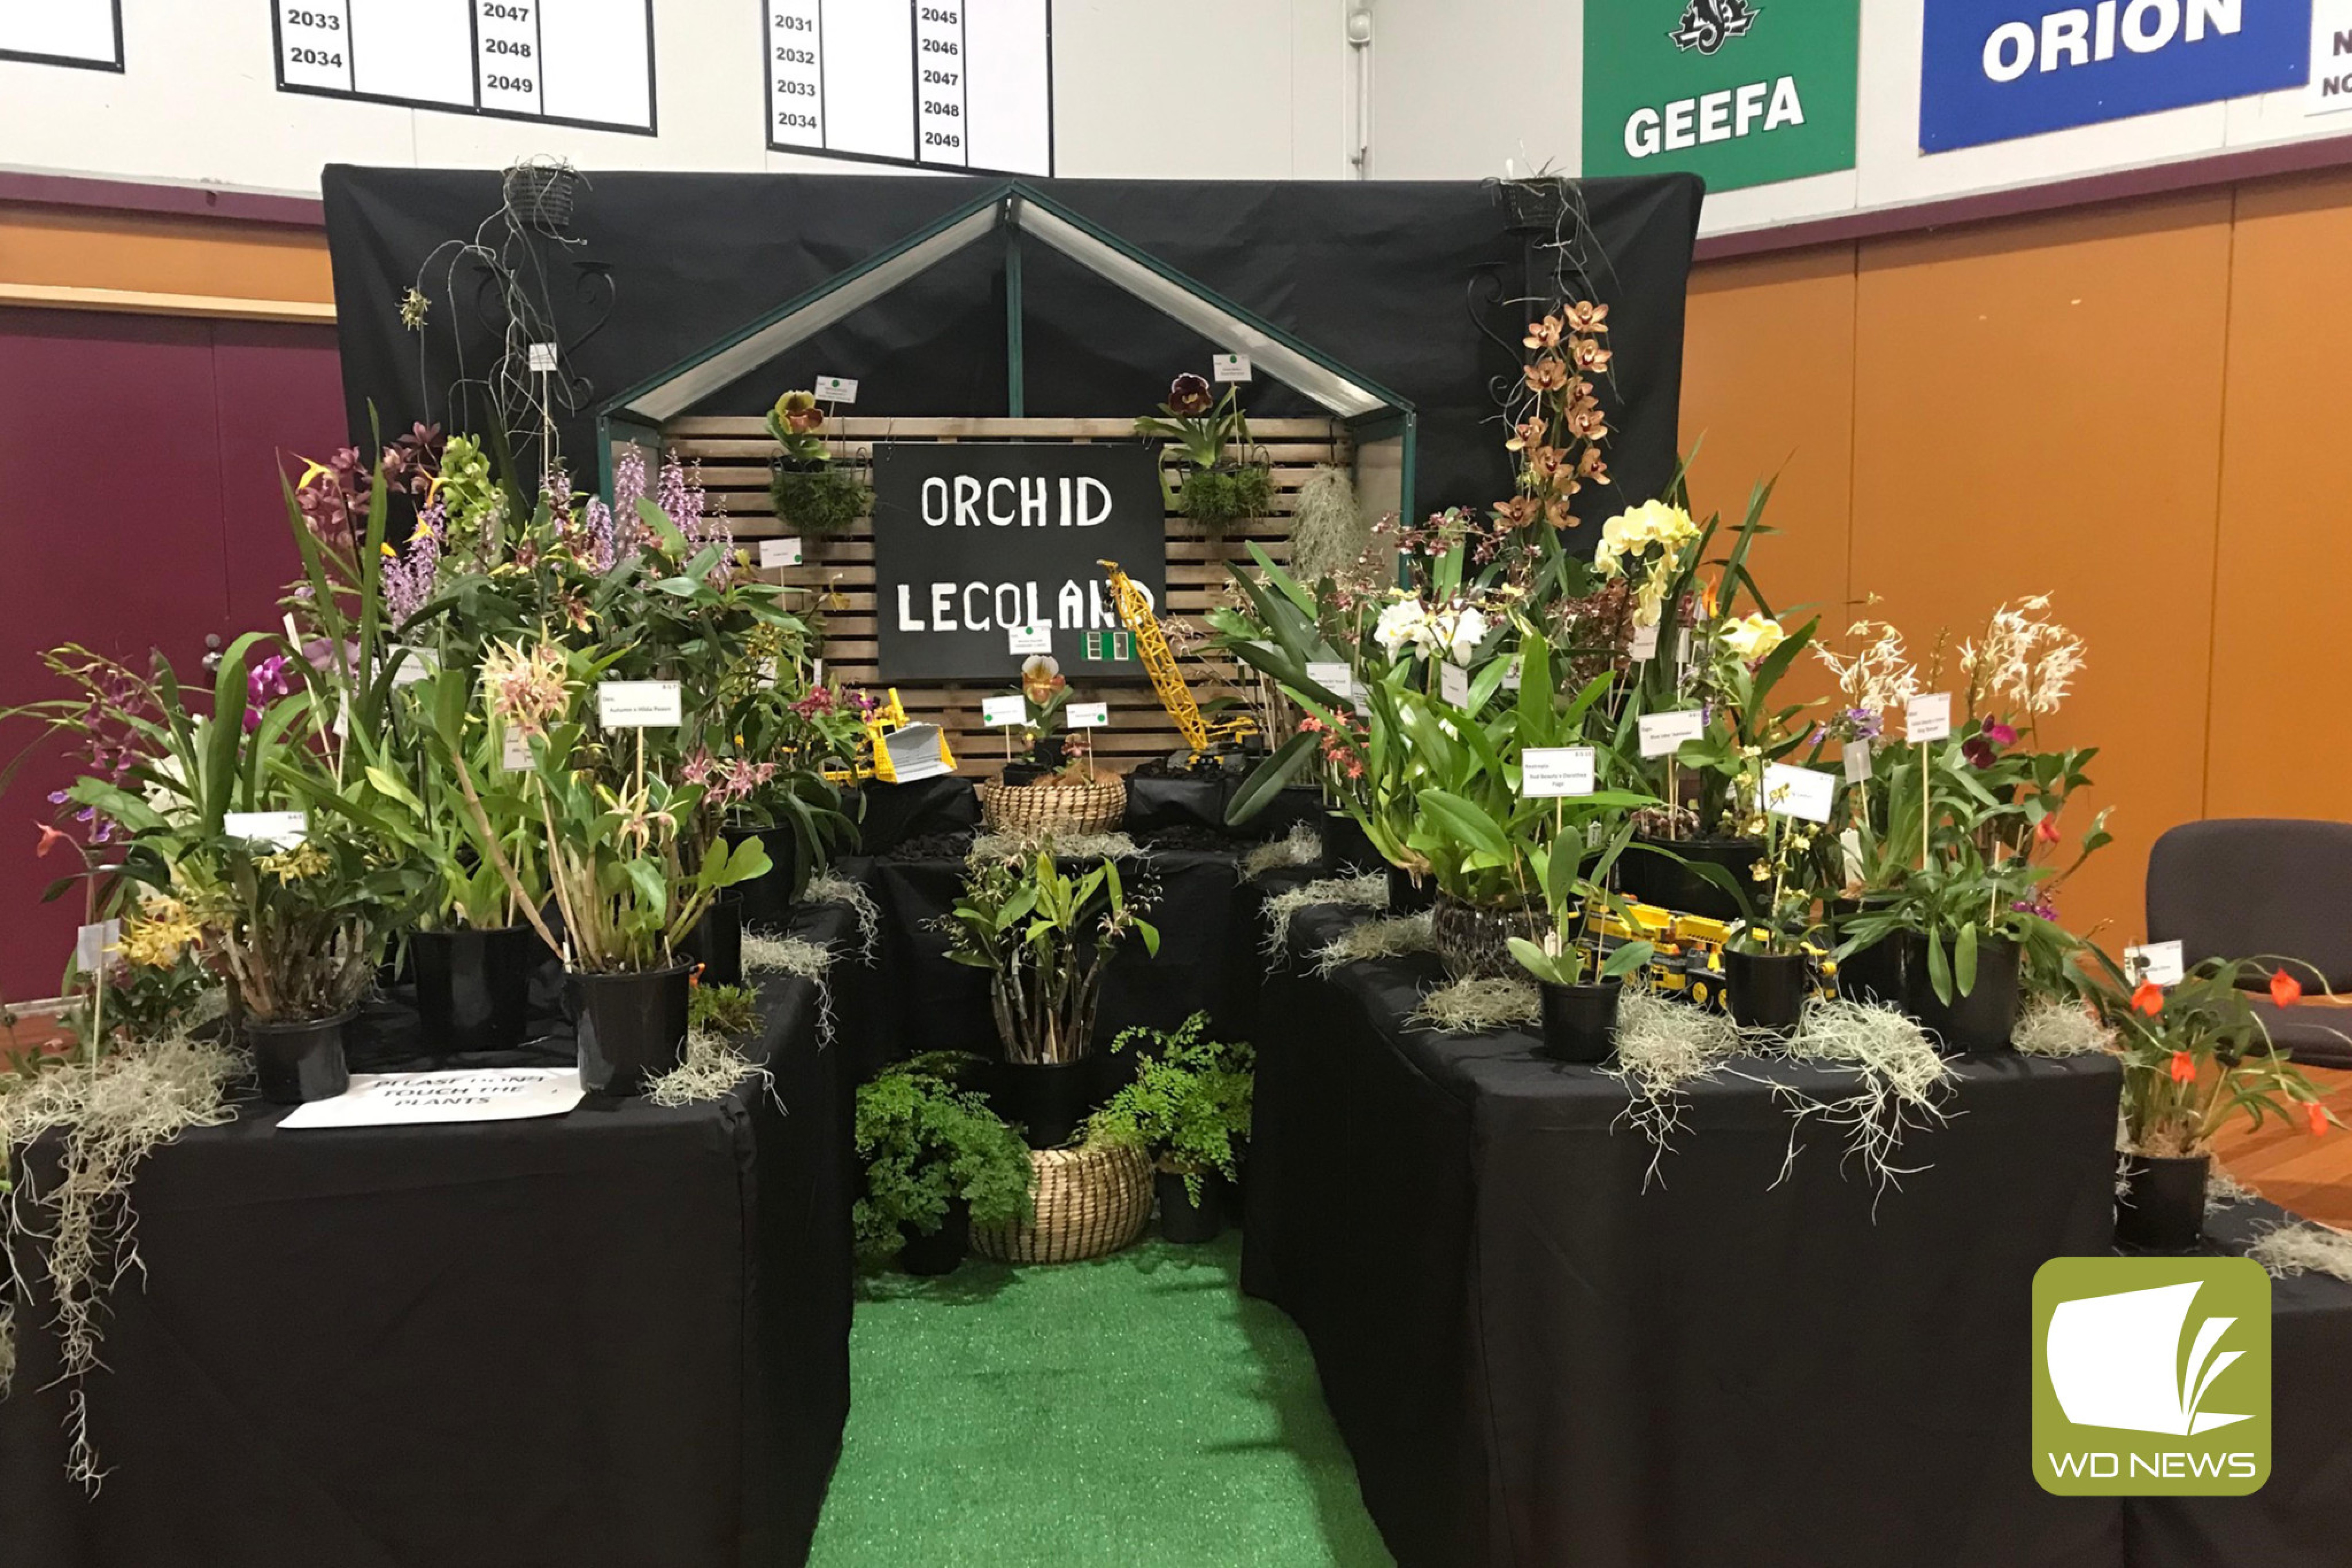 Congratulations: Cobden and District Orchid Club took part in the 23rd Annual Victorian Orchid Club’s Challenge weekend recently.